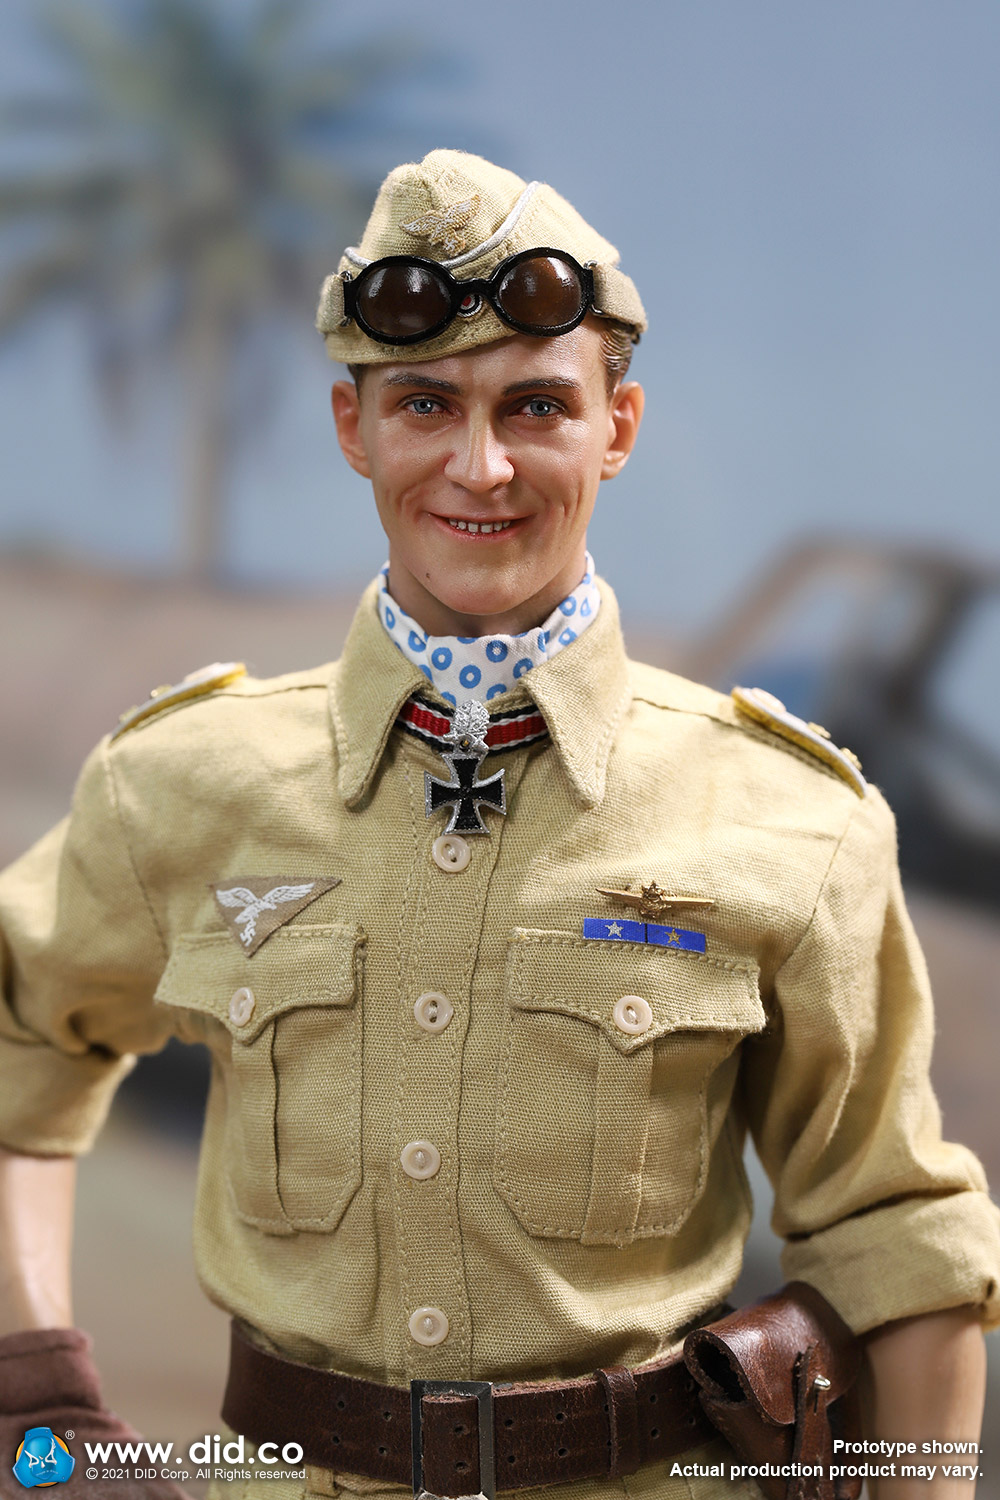 NEW PRODUCT: D80154 WWII German Luftwaffe Flying Ace “Star Of Africa” – Hans-Joachim Marseille & E60060  Diorama Of “Star Of Africa” 31120